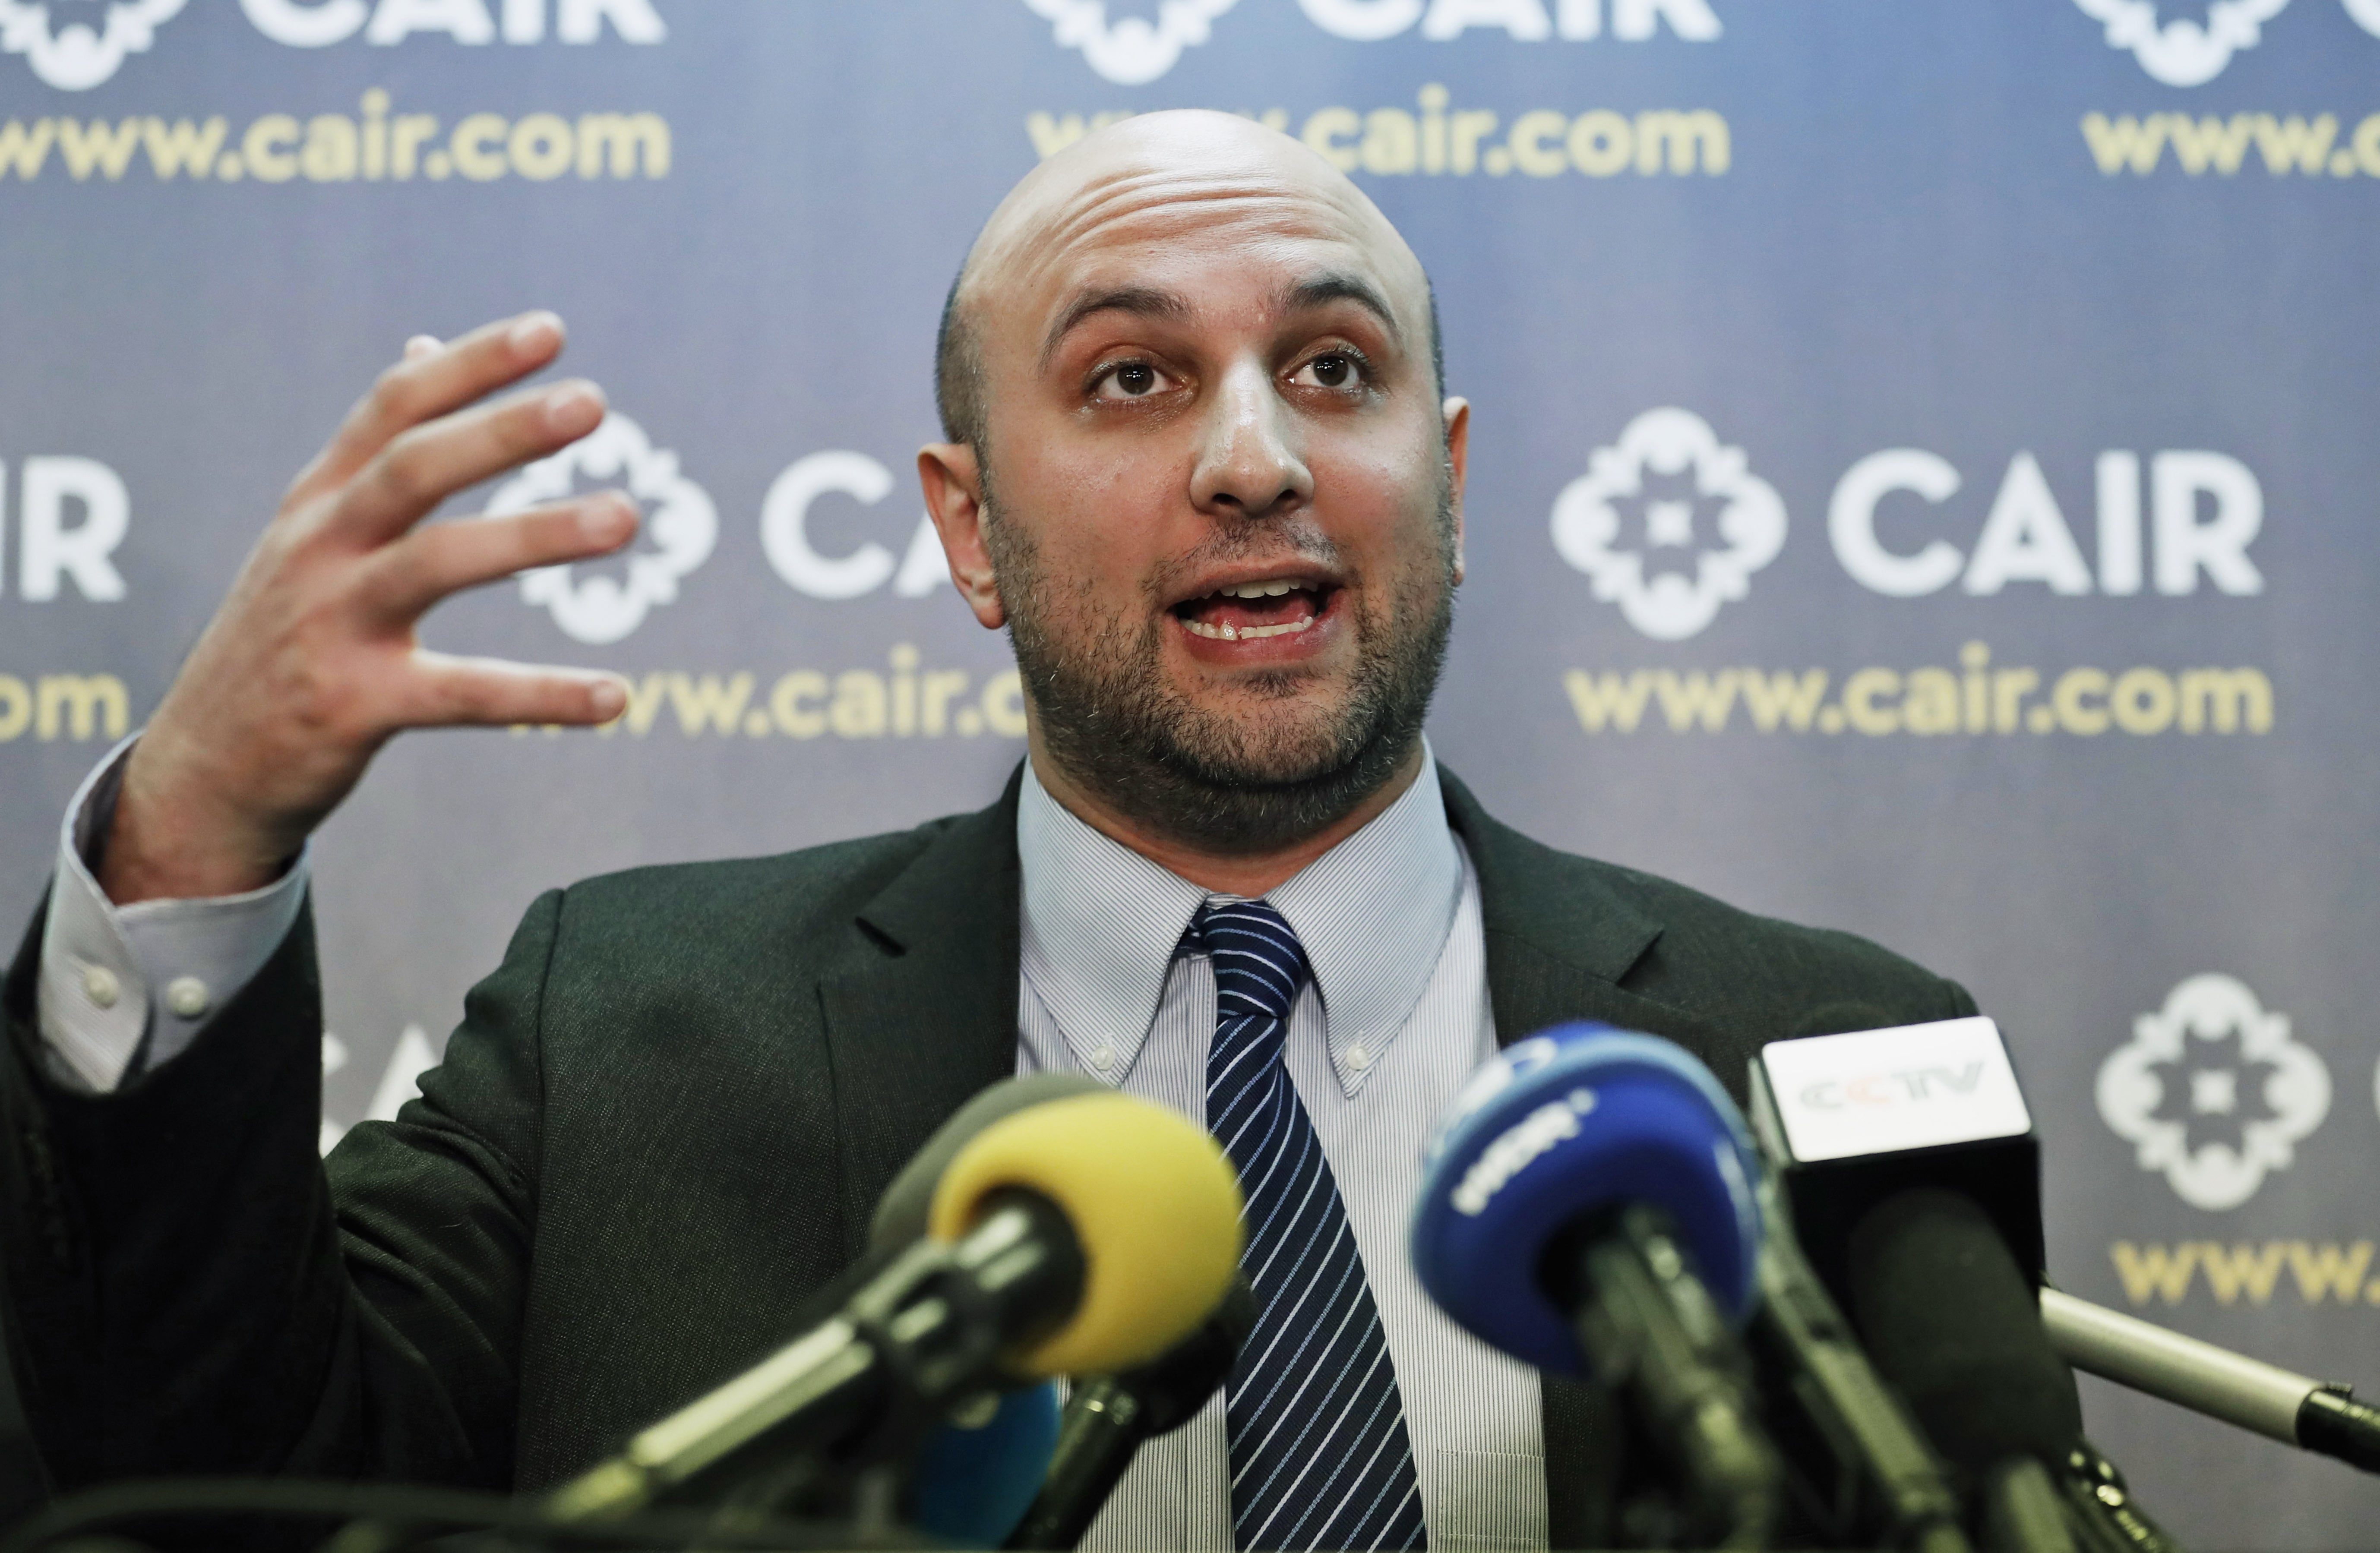 Attorney Gadeir Abbas speaks during a news conference at the Council on American-Islamic Relations (CAIR) in Washington. The federal government has acknowledged that it shares its terrorist watchlist with more than 1,400 private entities, including hospitals and universities, prompting concerns from civil libertarians that those mistakenly placed on the list could face a wide variety of hassles in their daily lives.